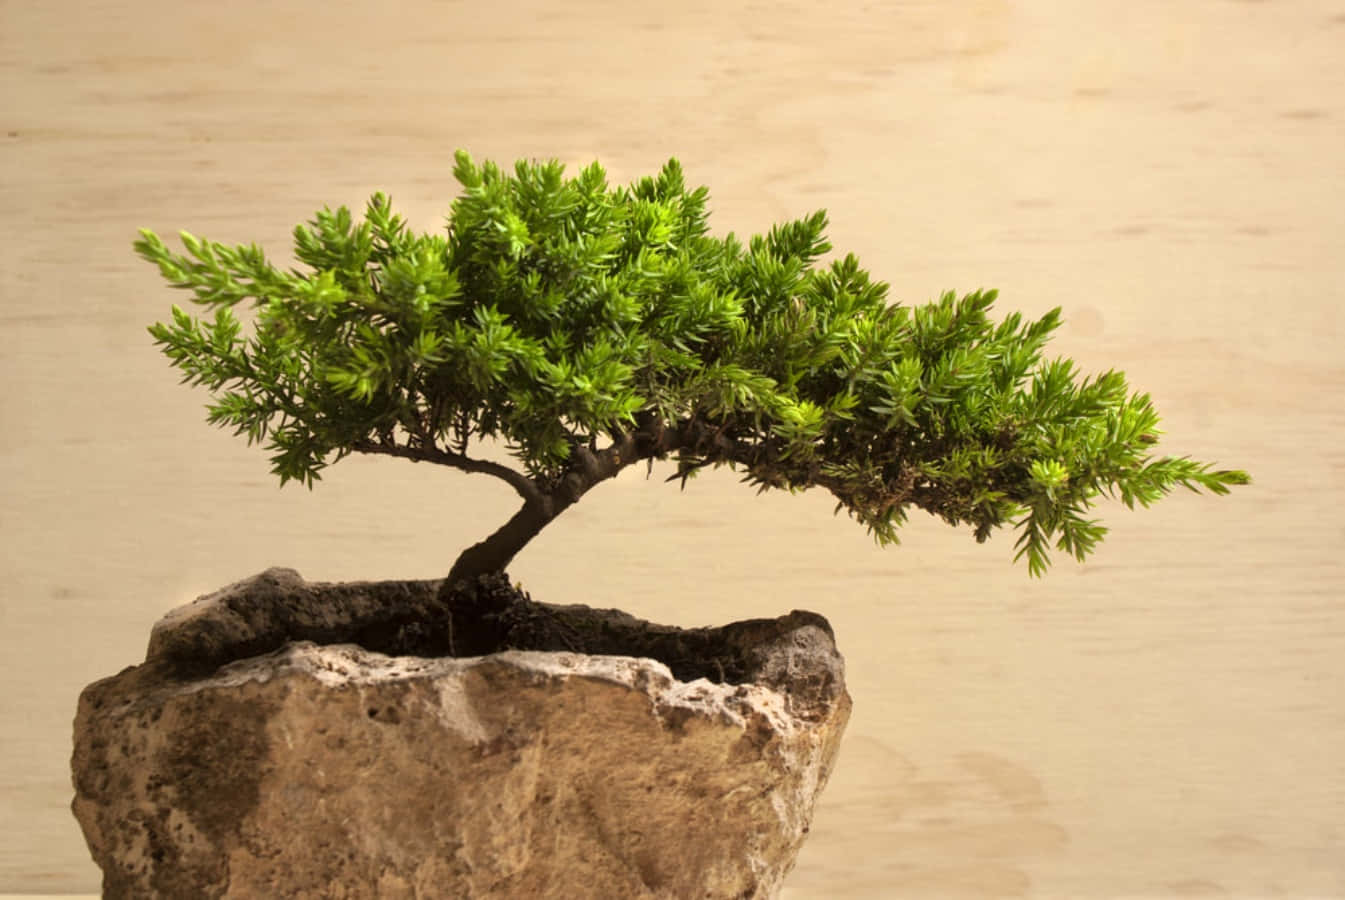 "A Group Of Artfully Trimmed Bonsai Trees"